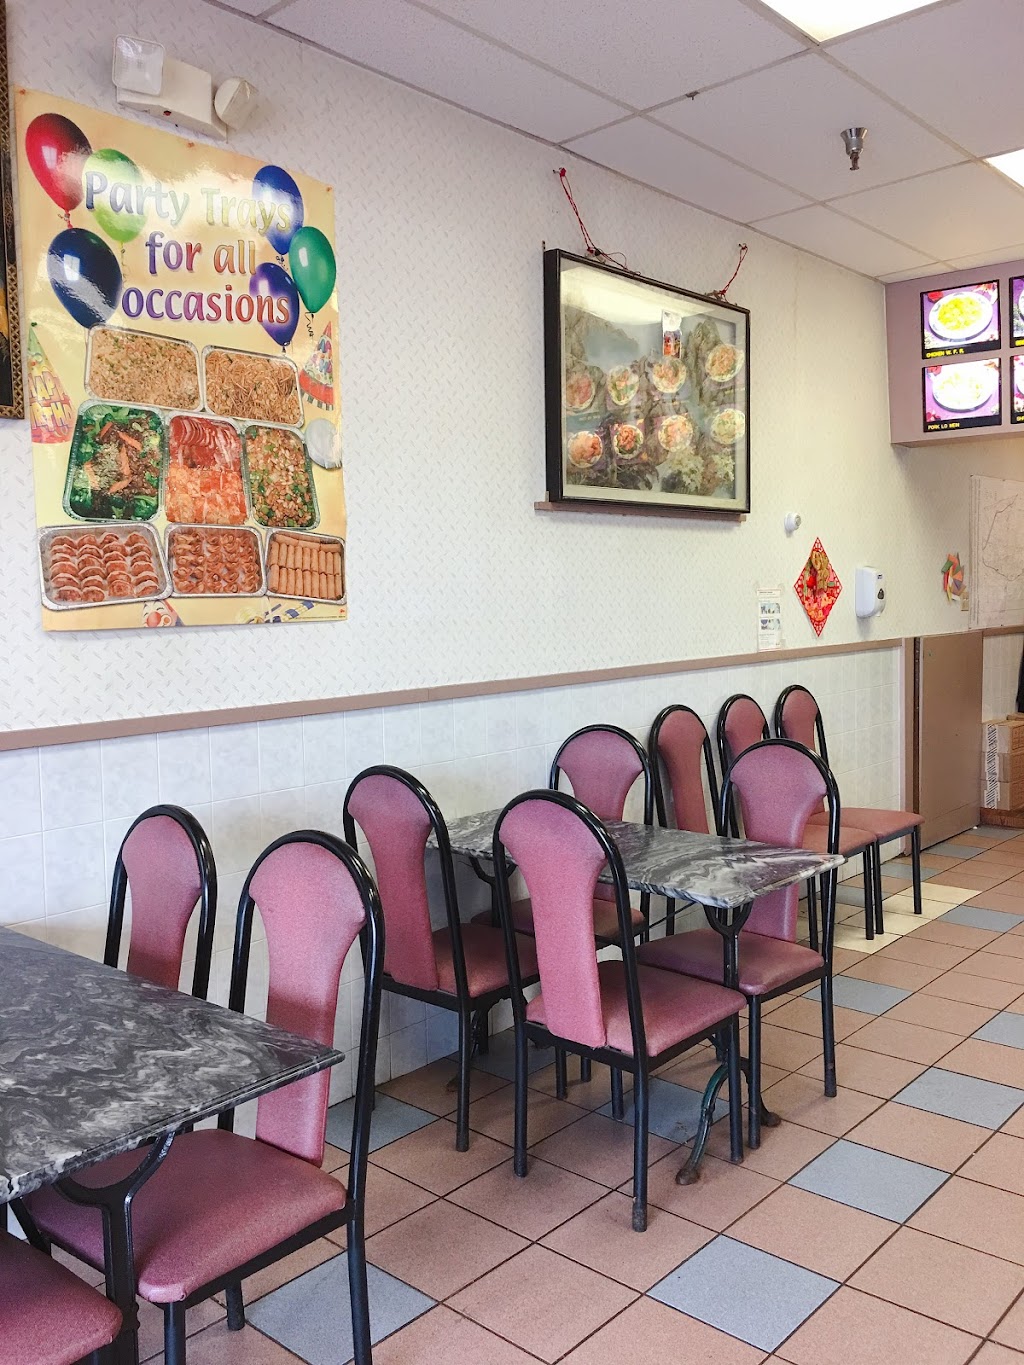 Ruby Chinese Food | 485 Hartford Rd, Manchester, CT 06040 | Phone: (860) 643-2494